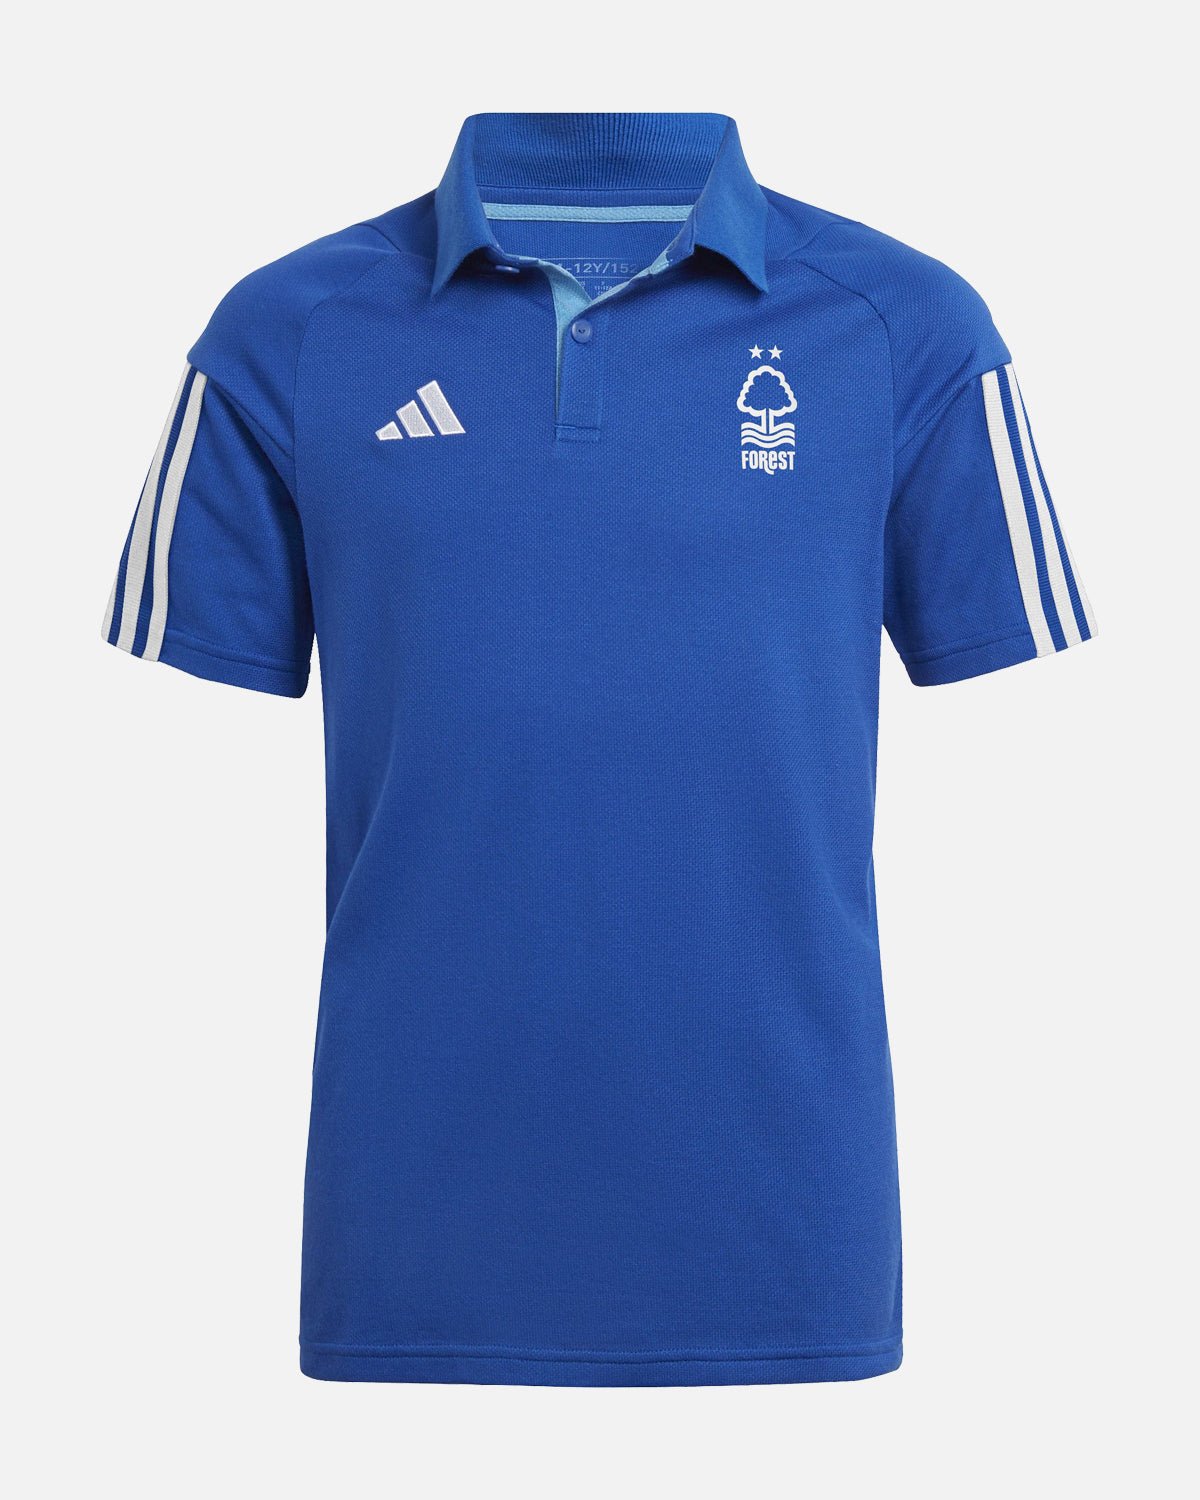 NFFC Junior Royal Travel Polo 23-24 - Nottingham Forest FC